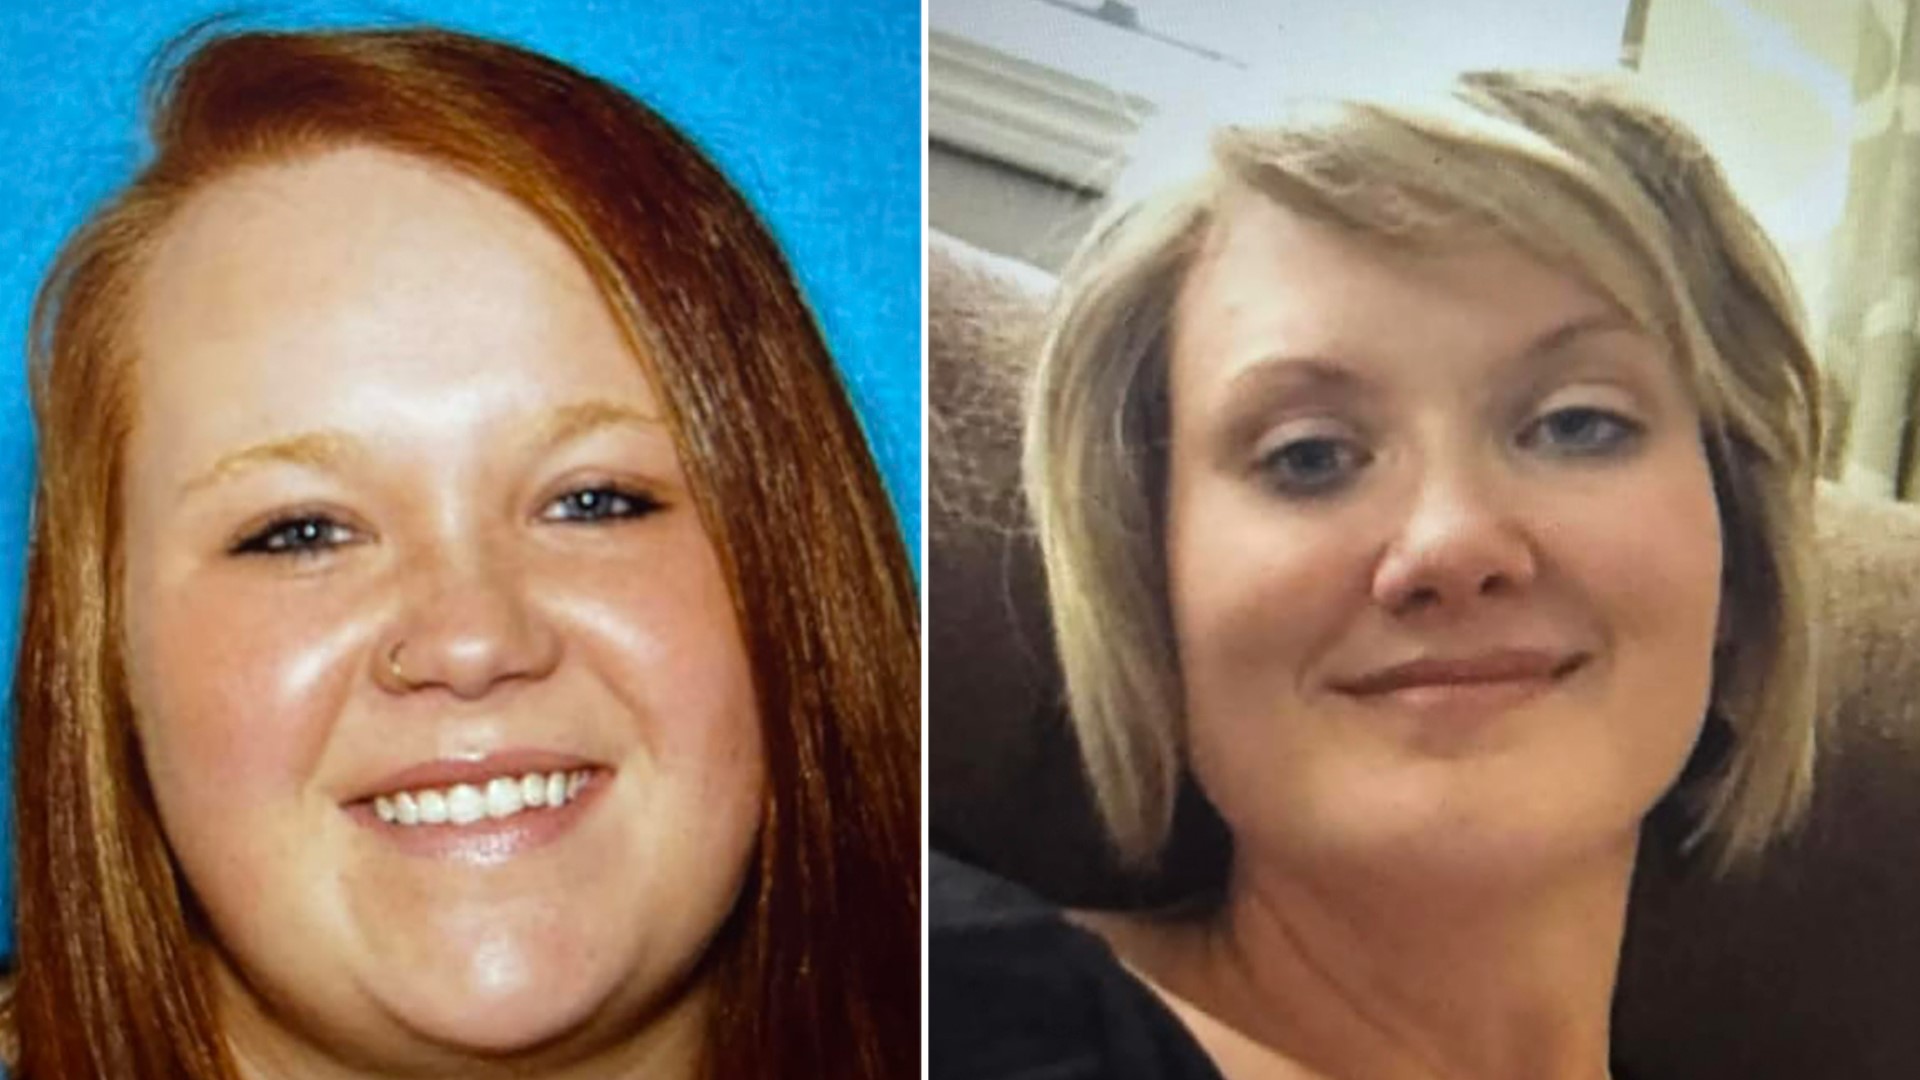 The FBI, Oklahoma Bureau of Investigations and district attorney all spoke Monday on the disappaearance of Veronica Butler, 27, and Jilian Kelley, 39.